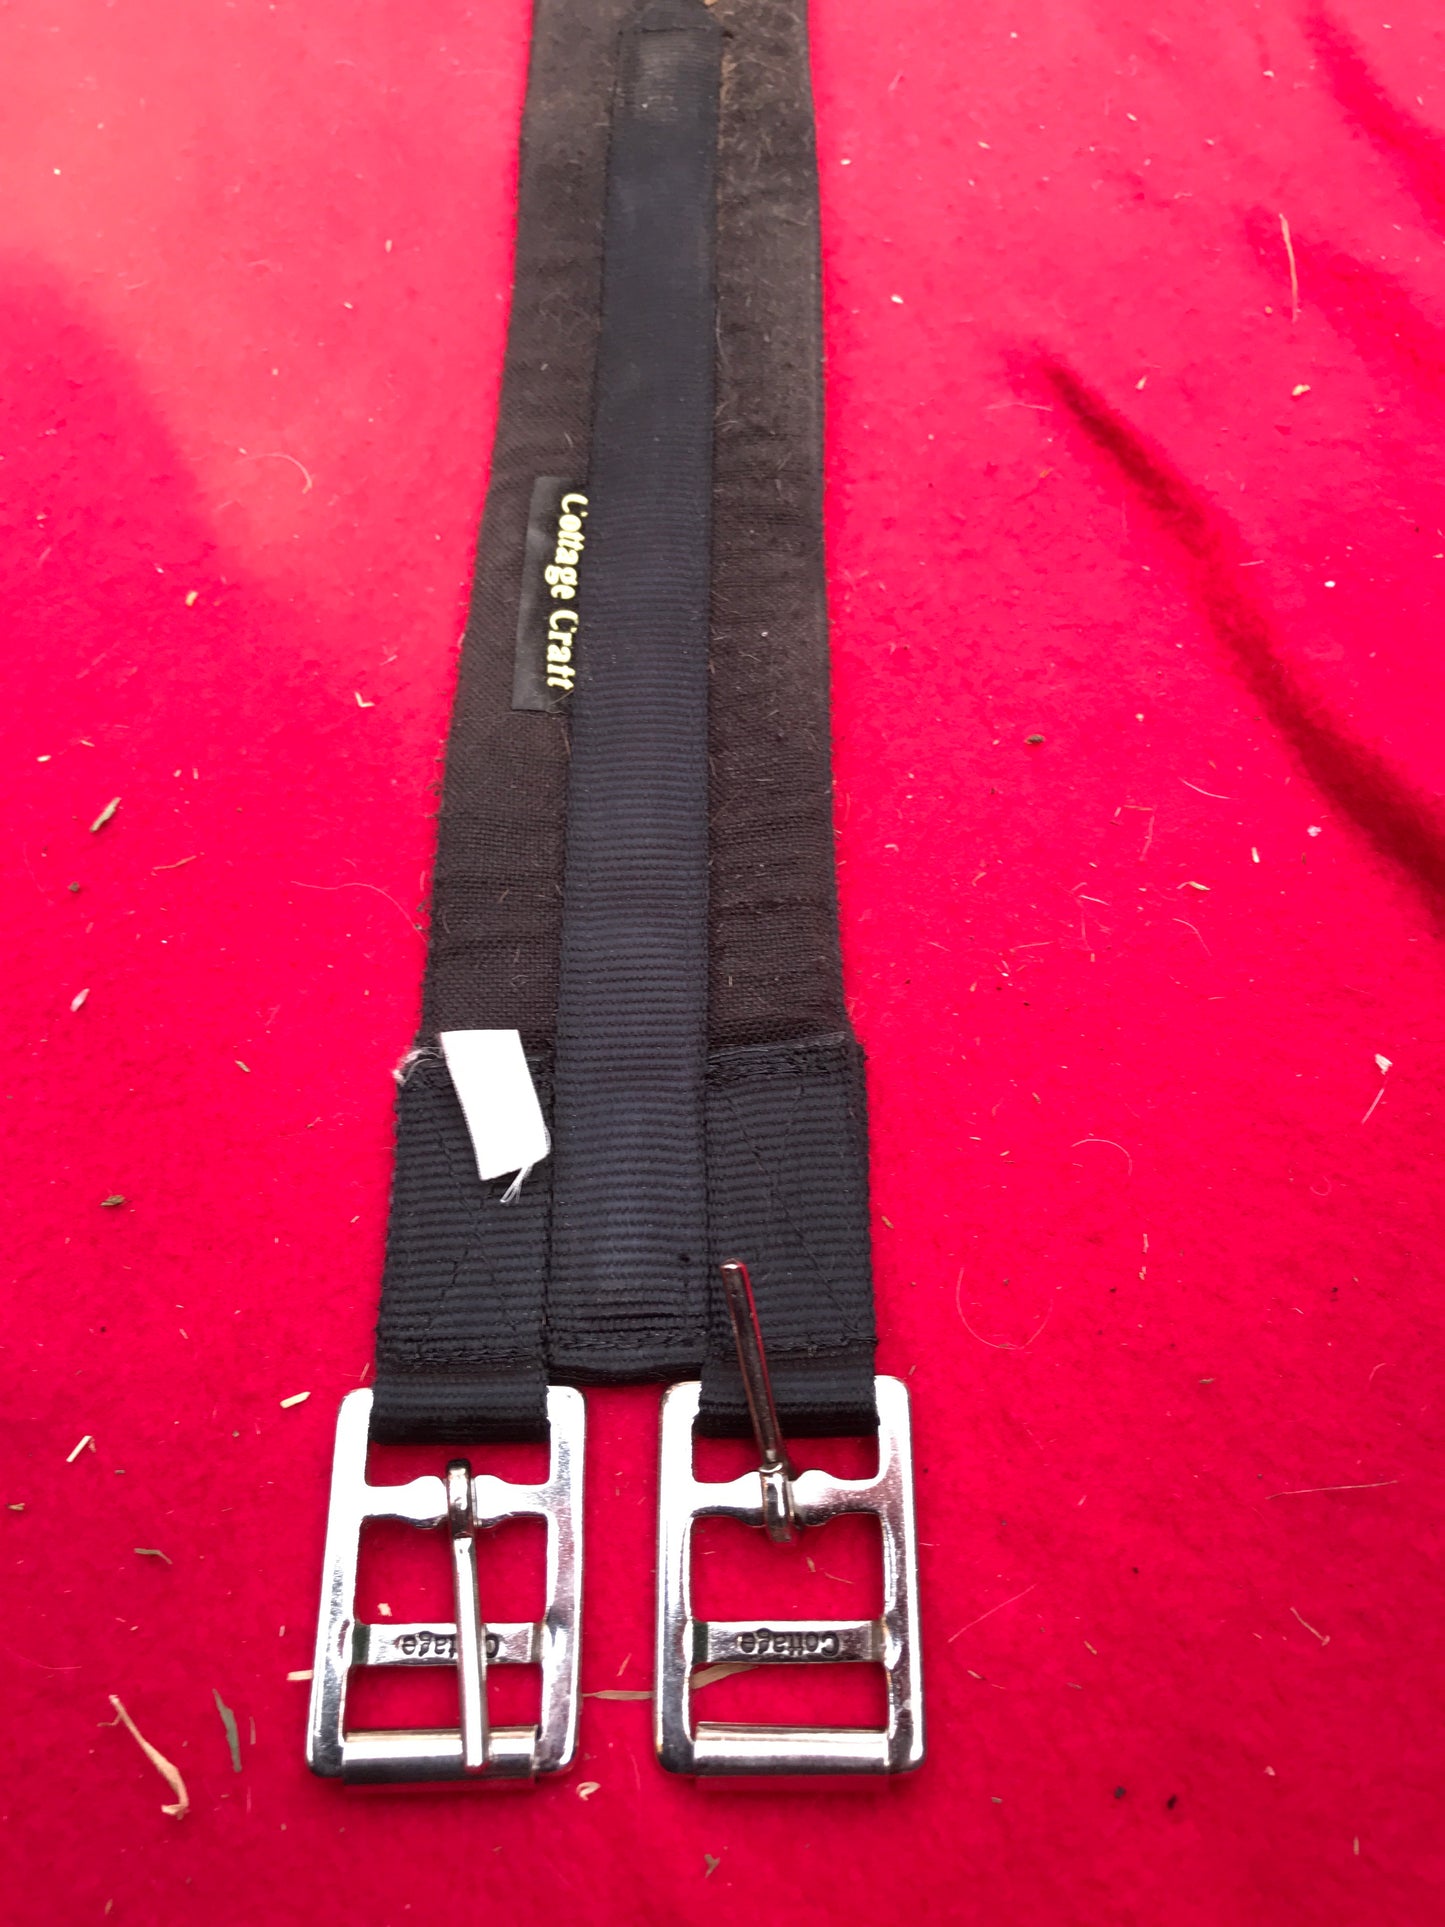 Black cottage Craft material girth size 49” FREE POSTAGE